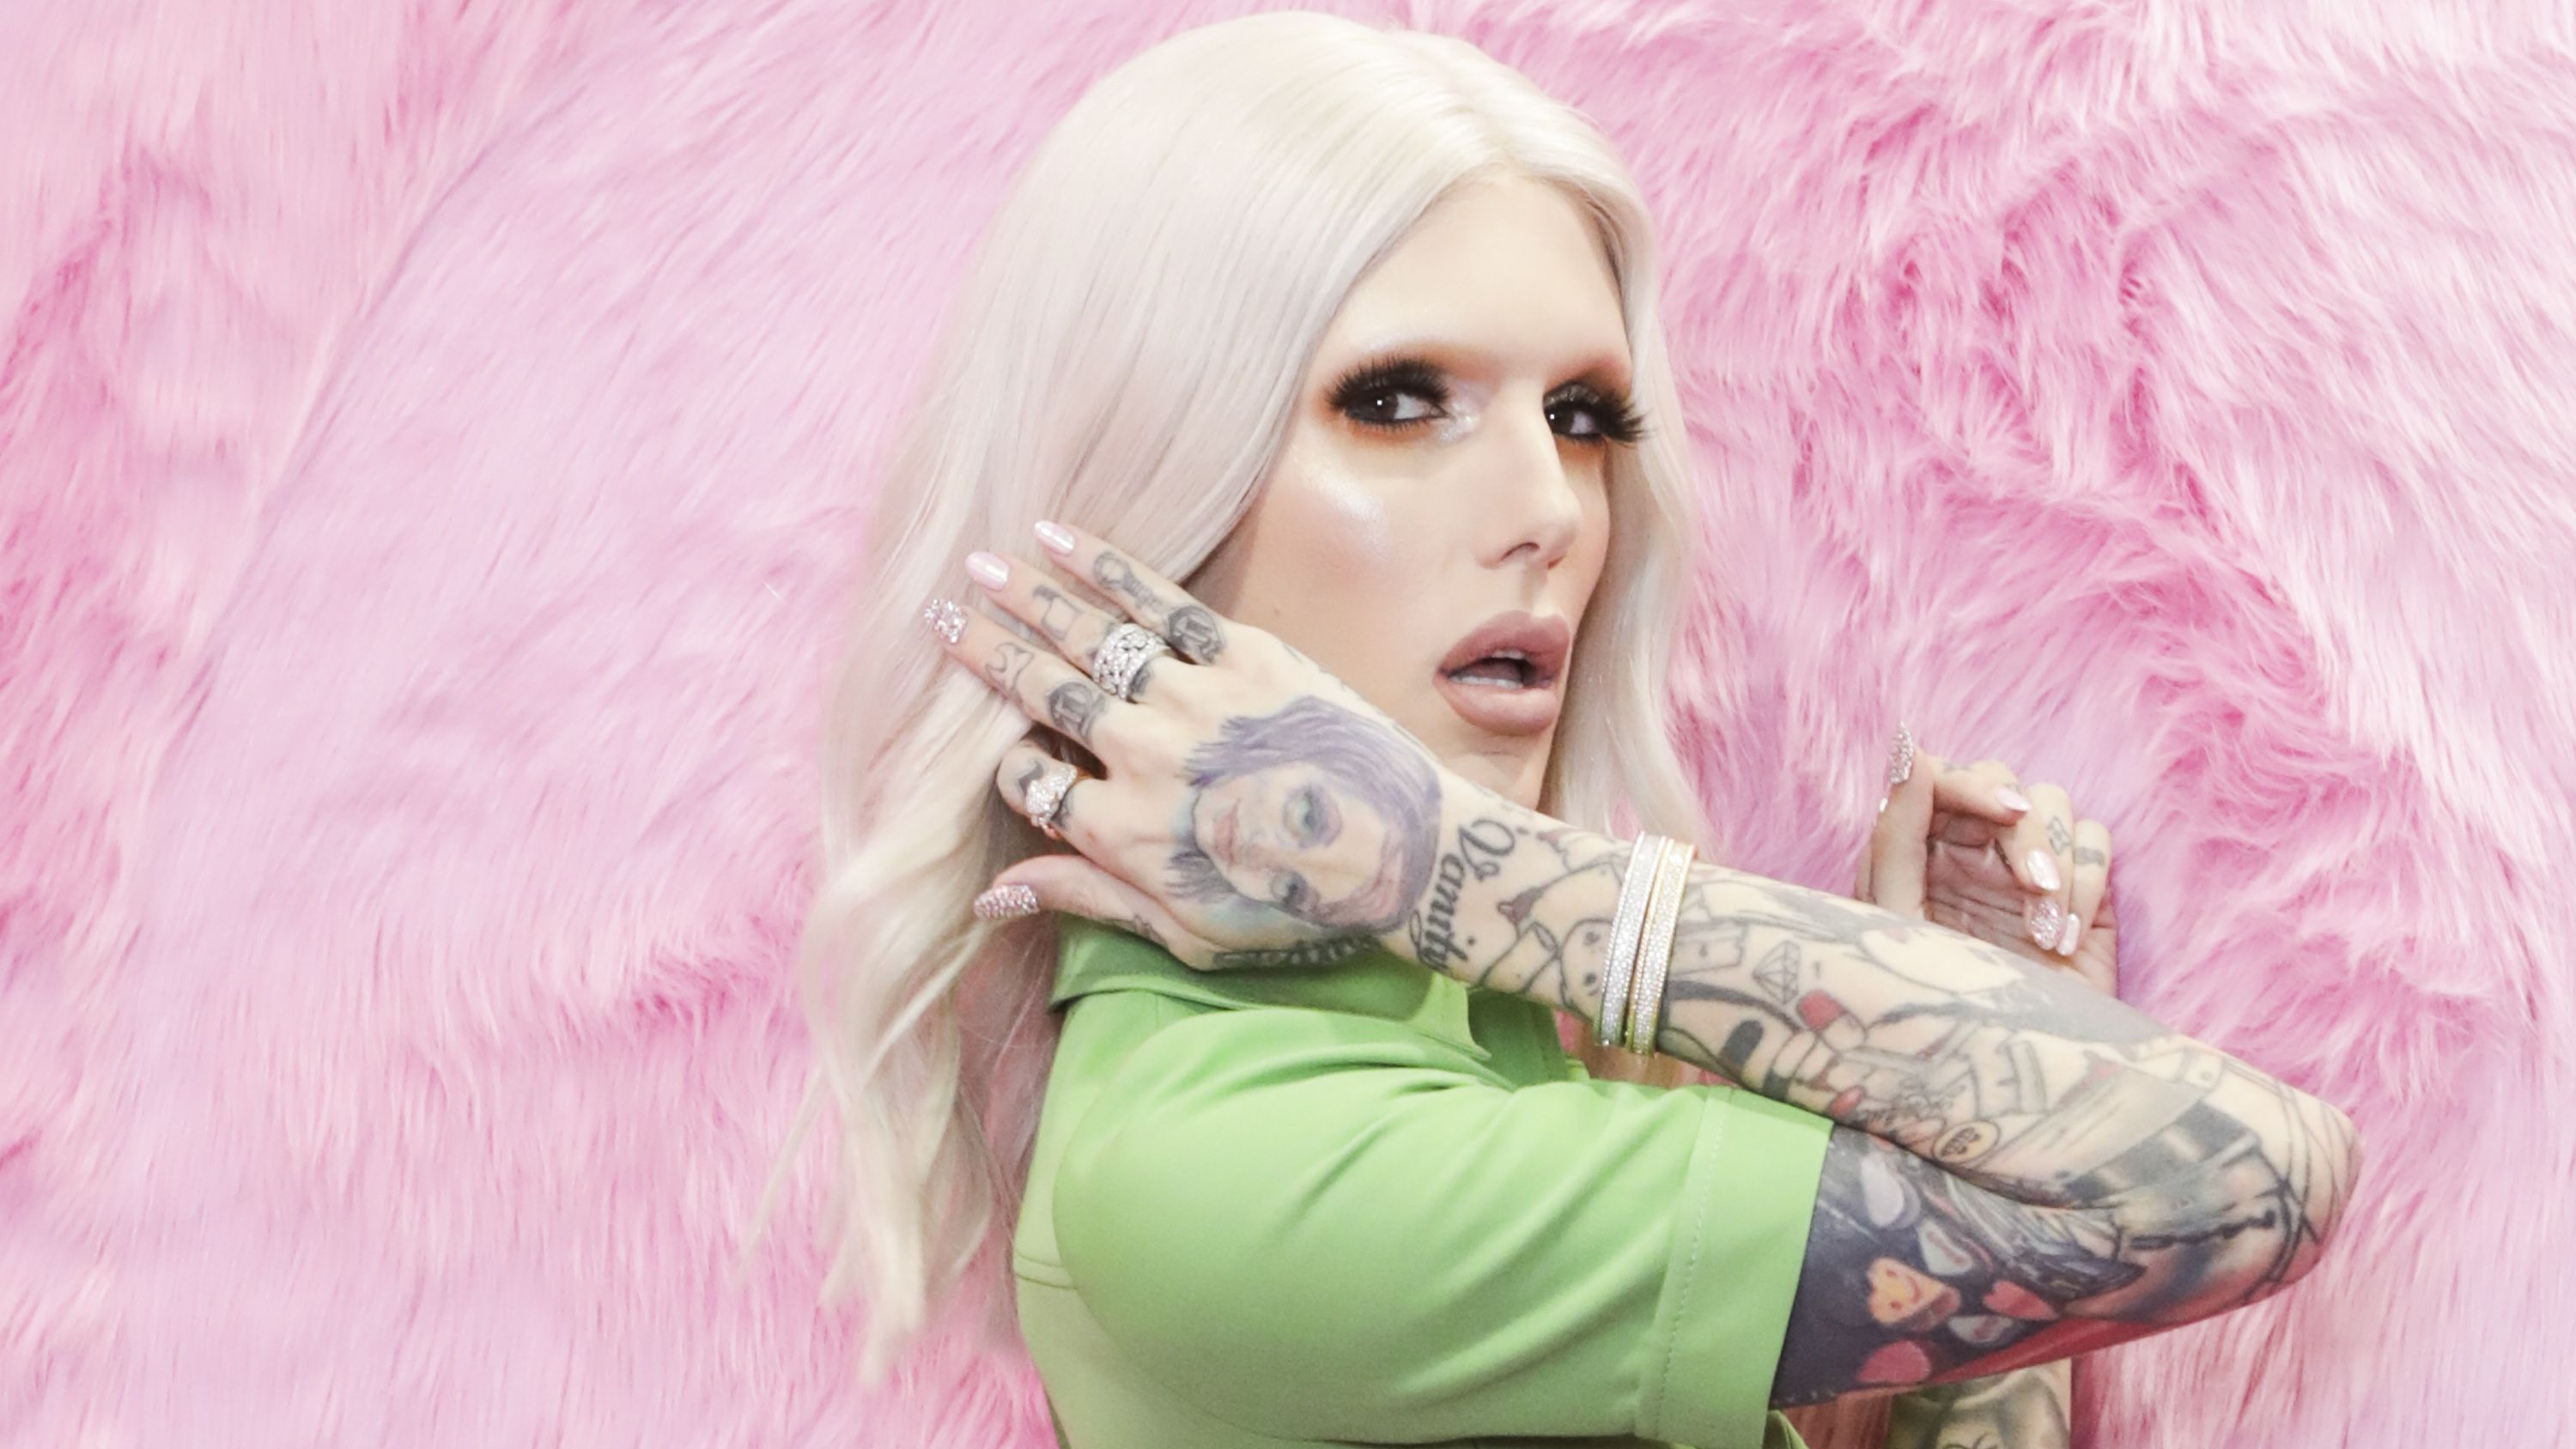 aflange Tag telefonen kobling Who Is Jeffree Star? - Everything to Know About Jeffree Star